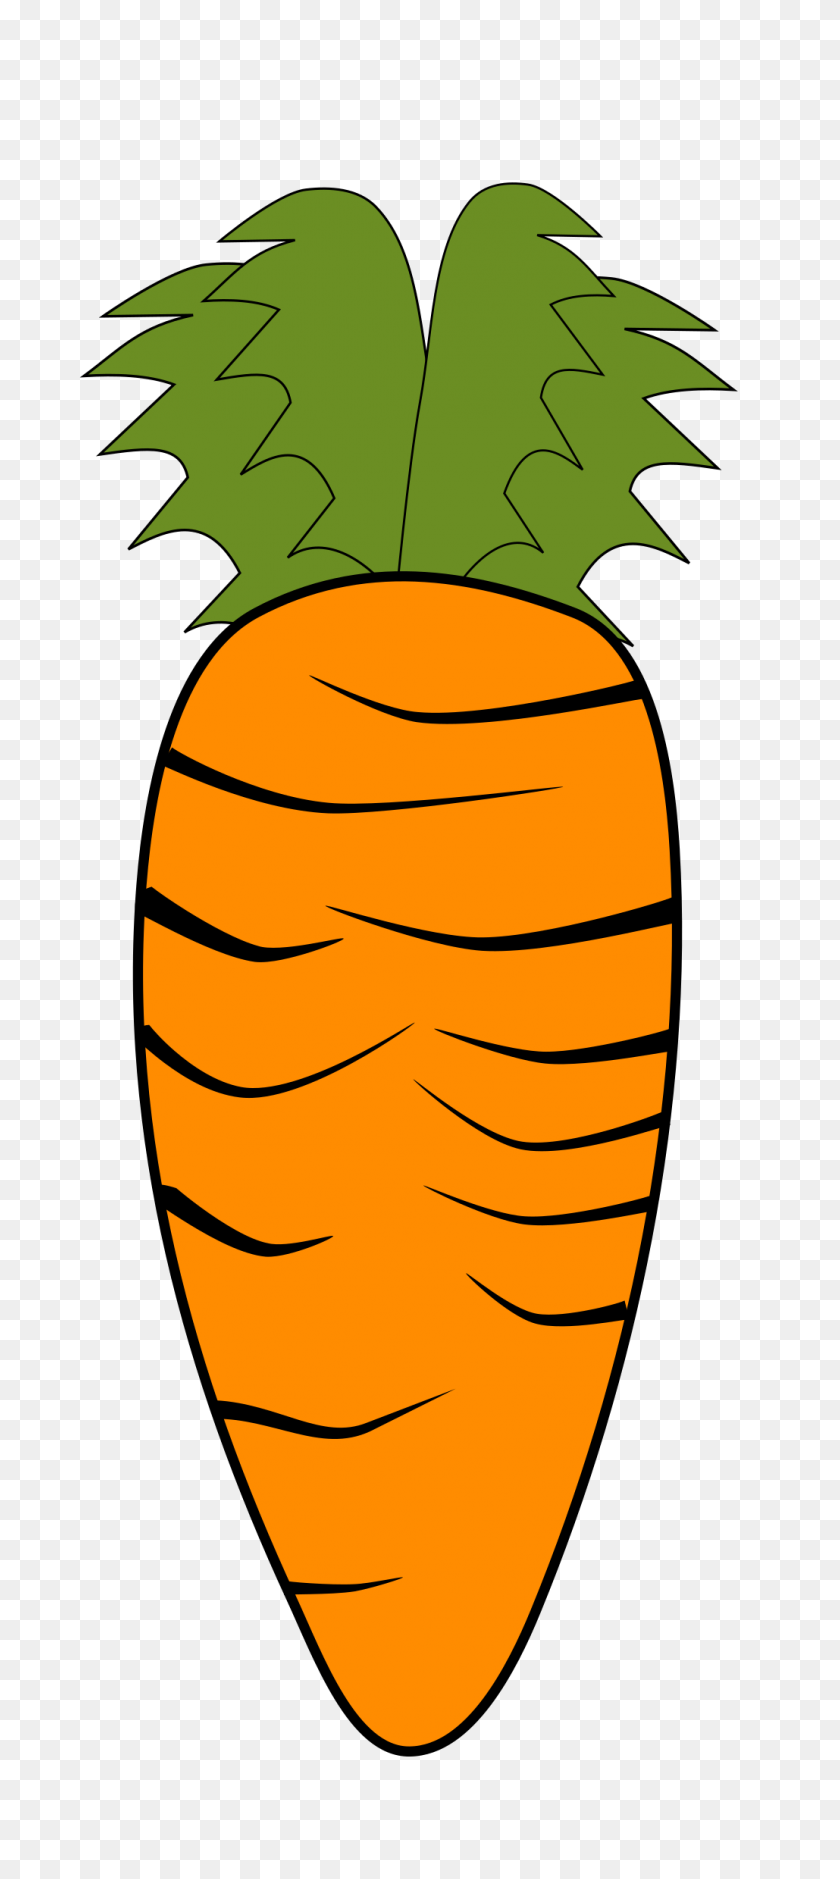 1029x2400 Carrot Clip Art Black And White - Carrot Clipart Black And White